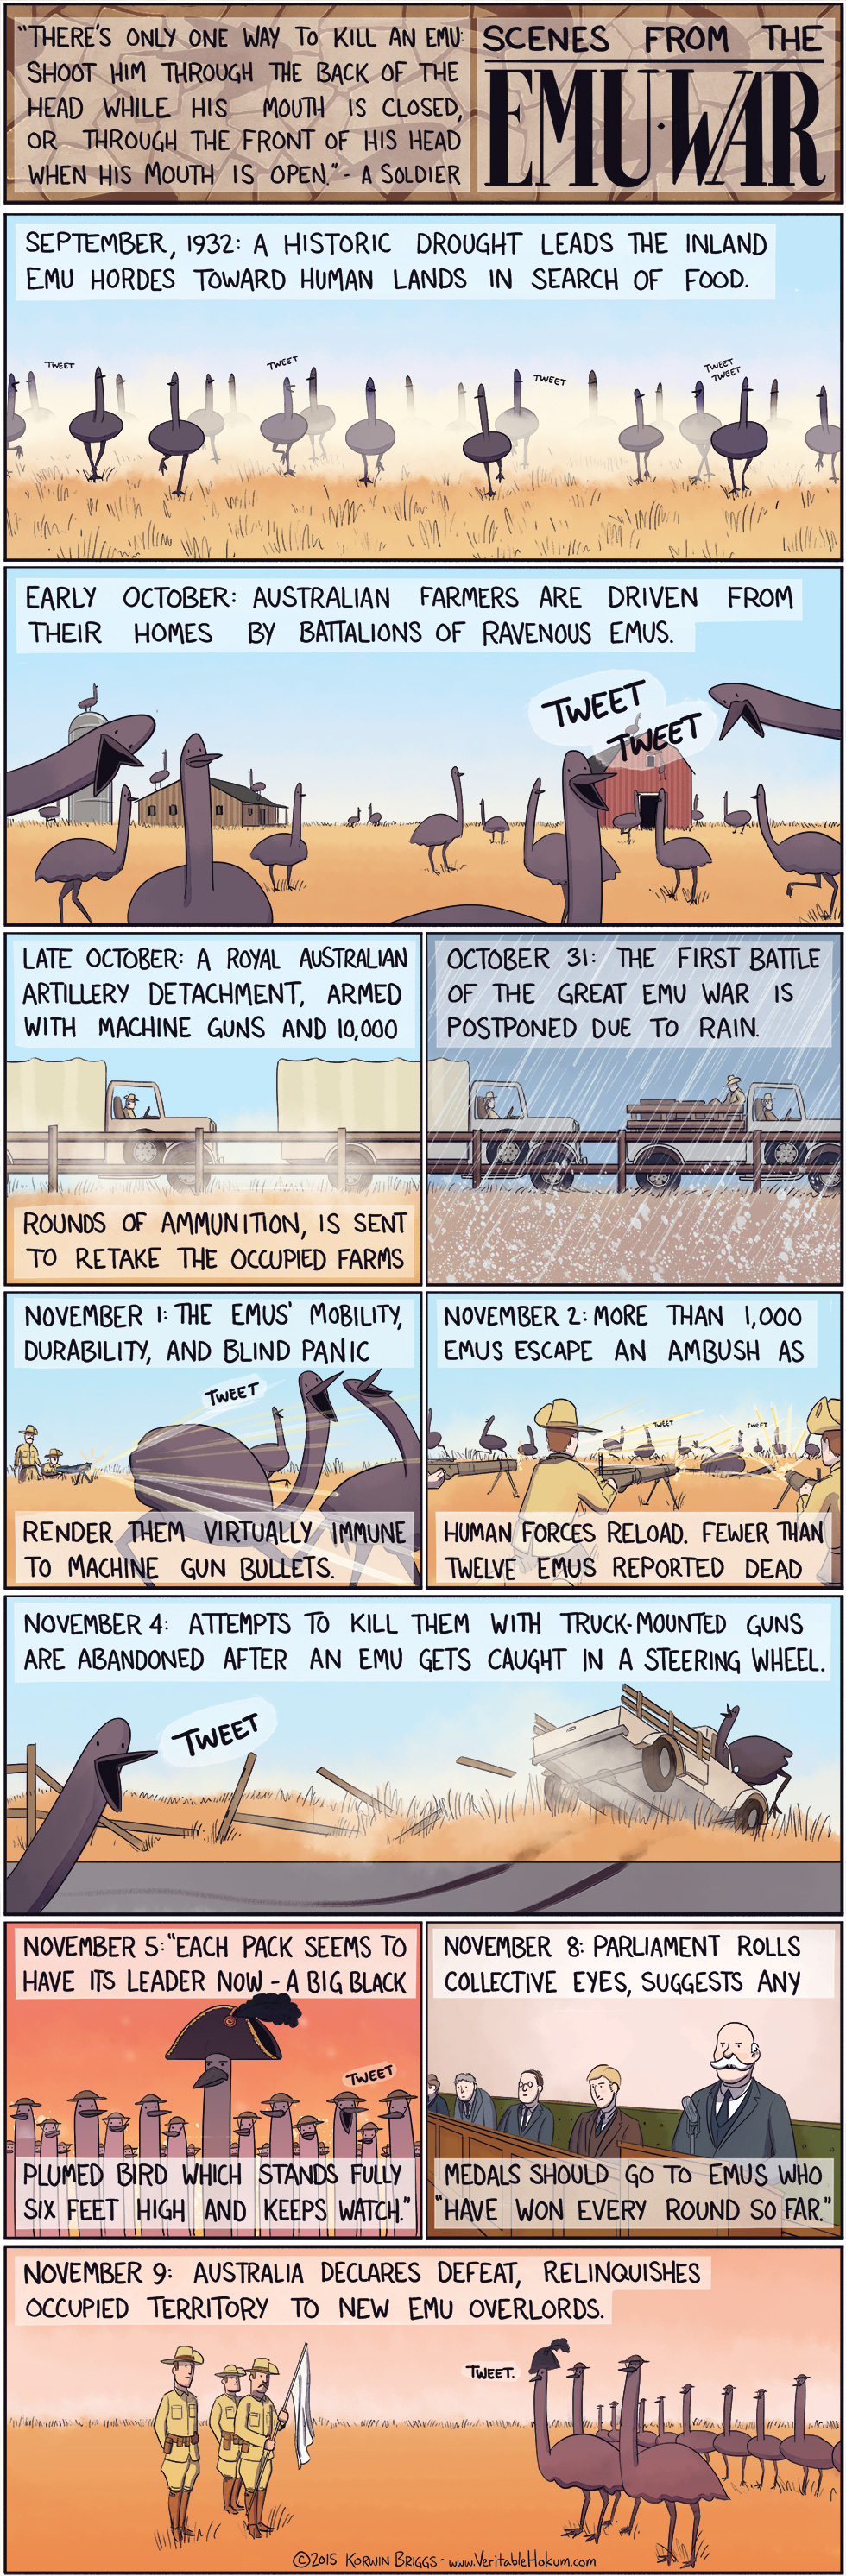 What is the Great Emu War?